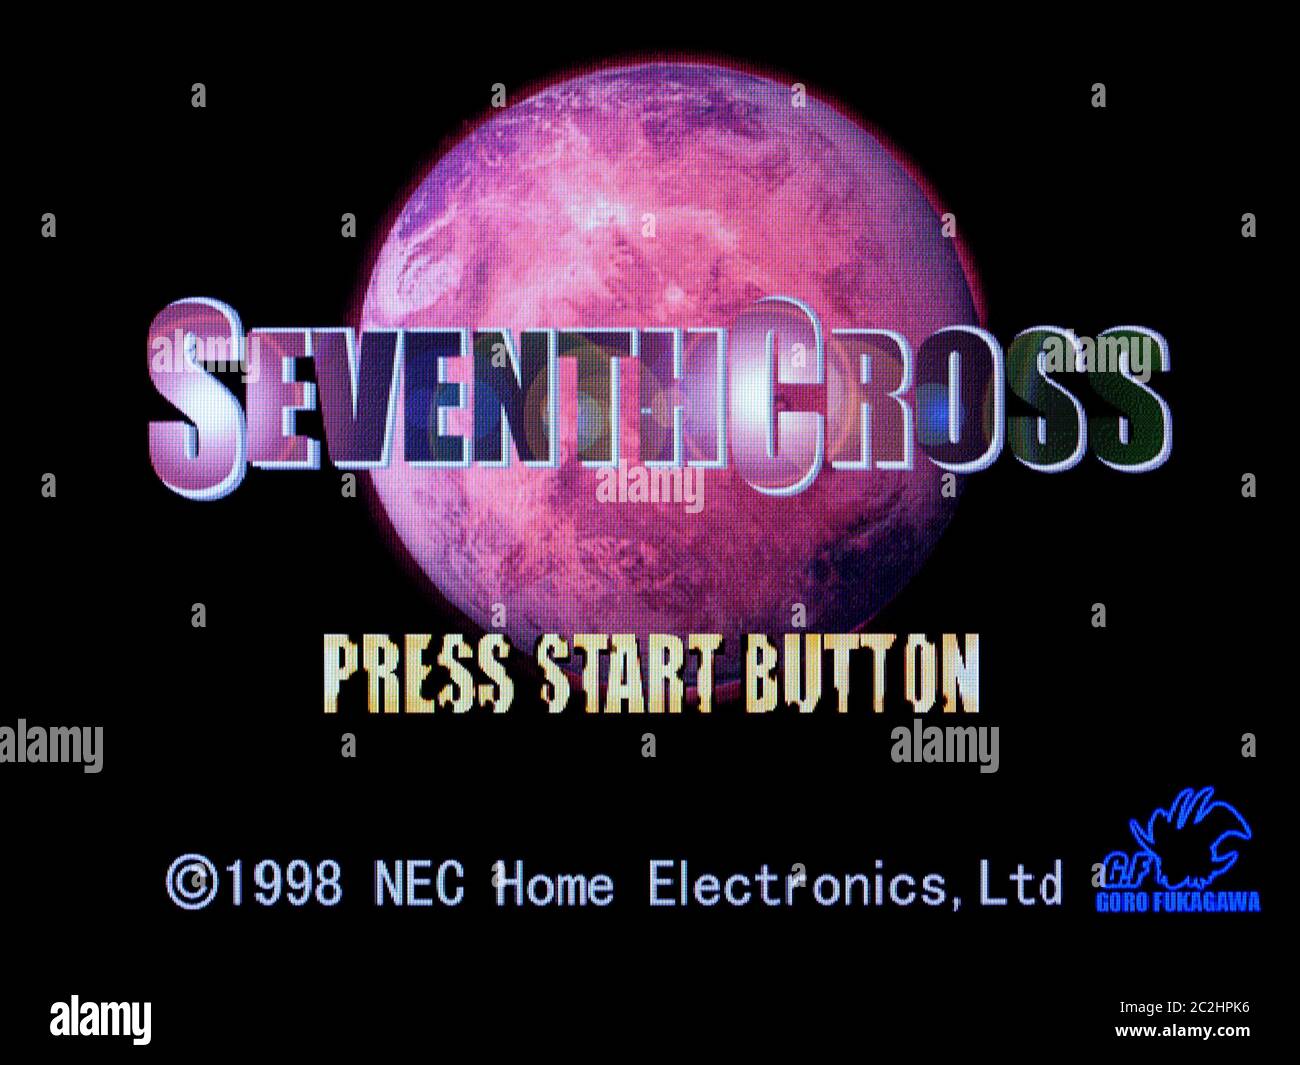 Seventh Cross - Sega Dreamcast Videogame - Editorial use only Stock Photo